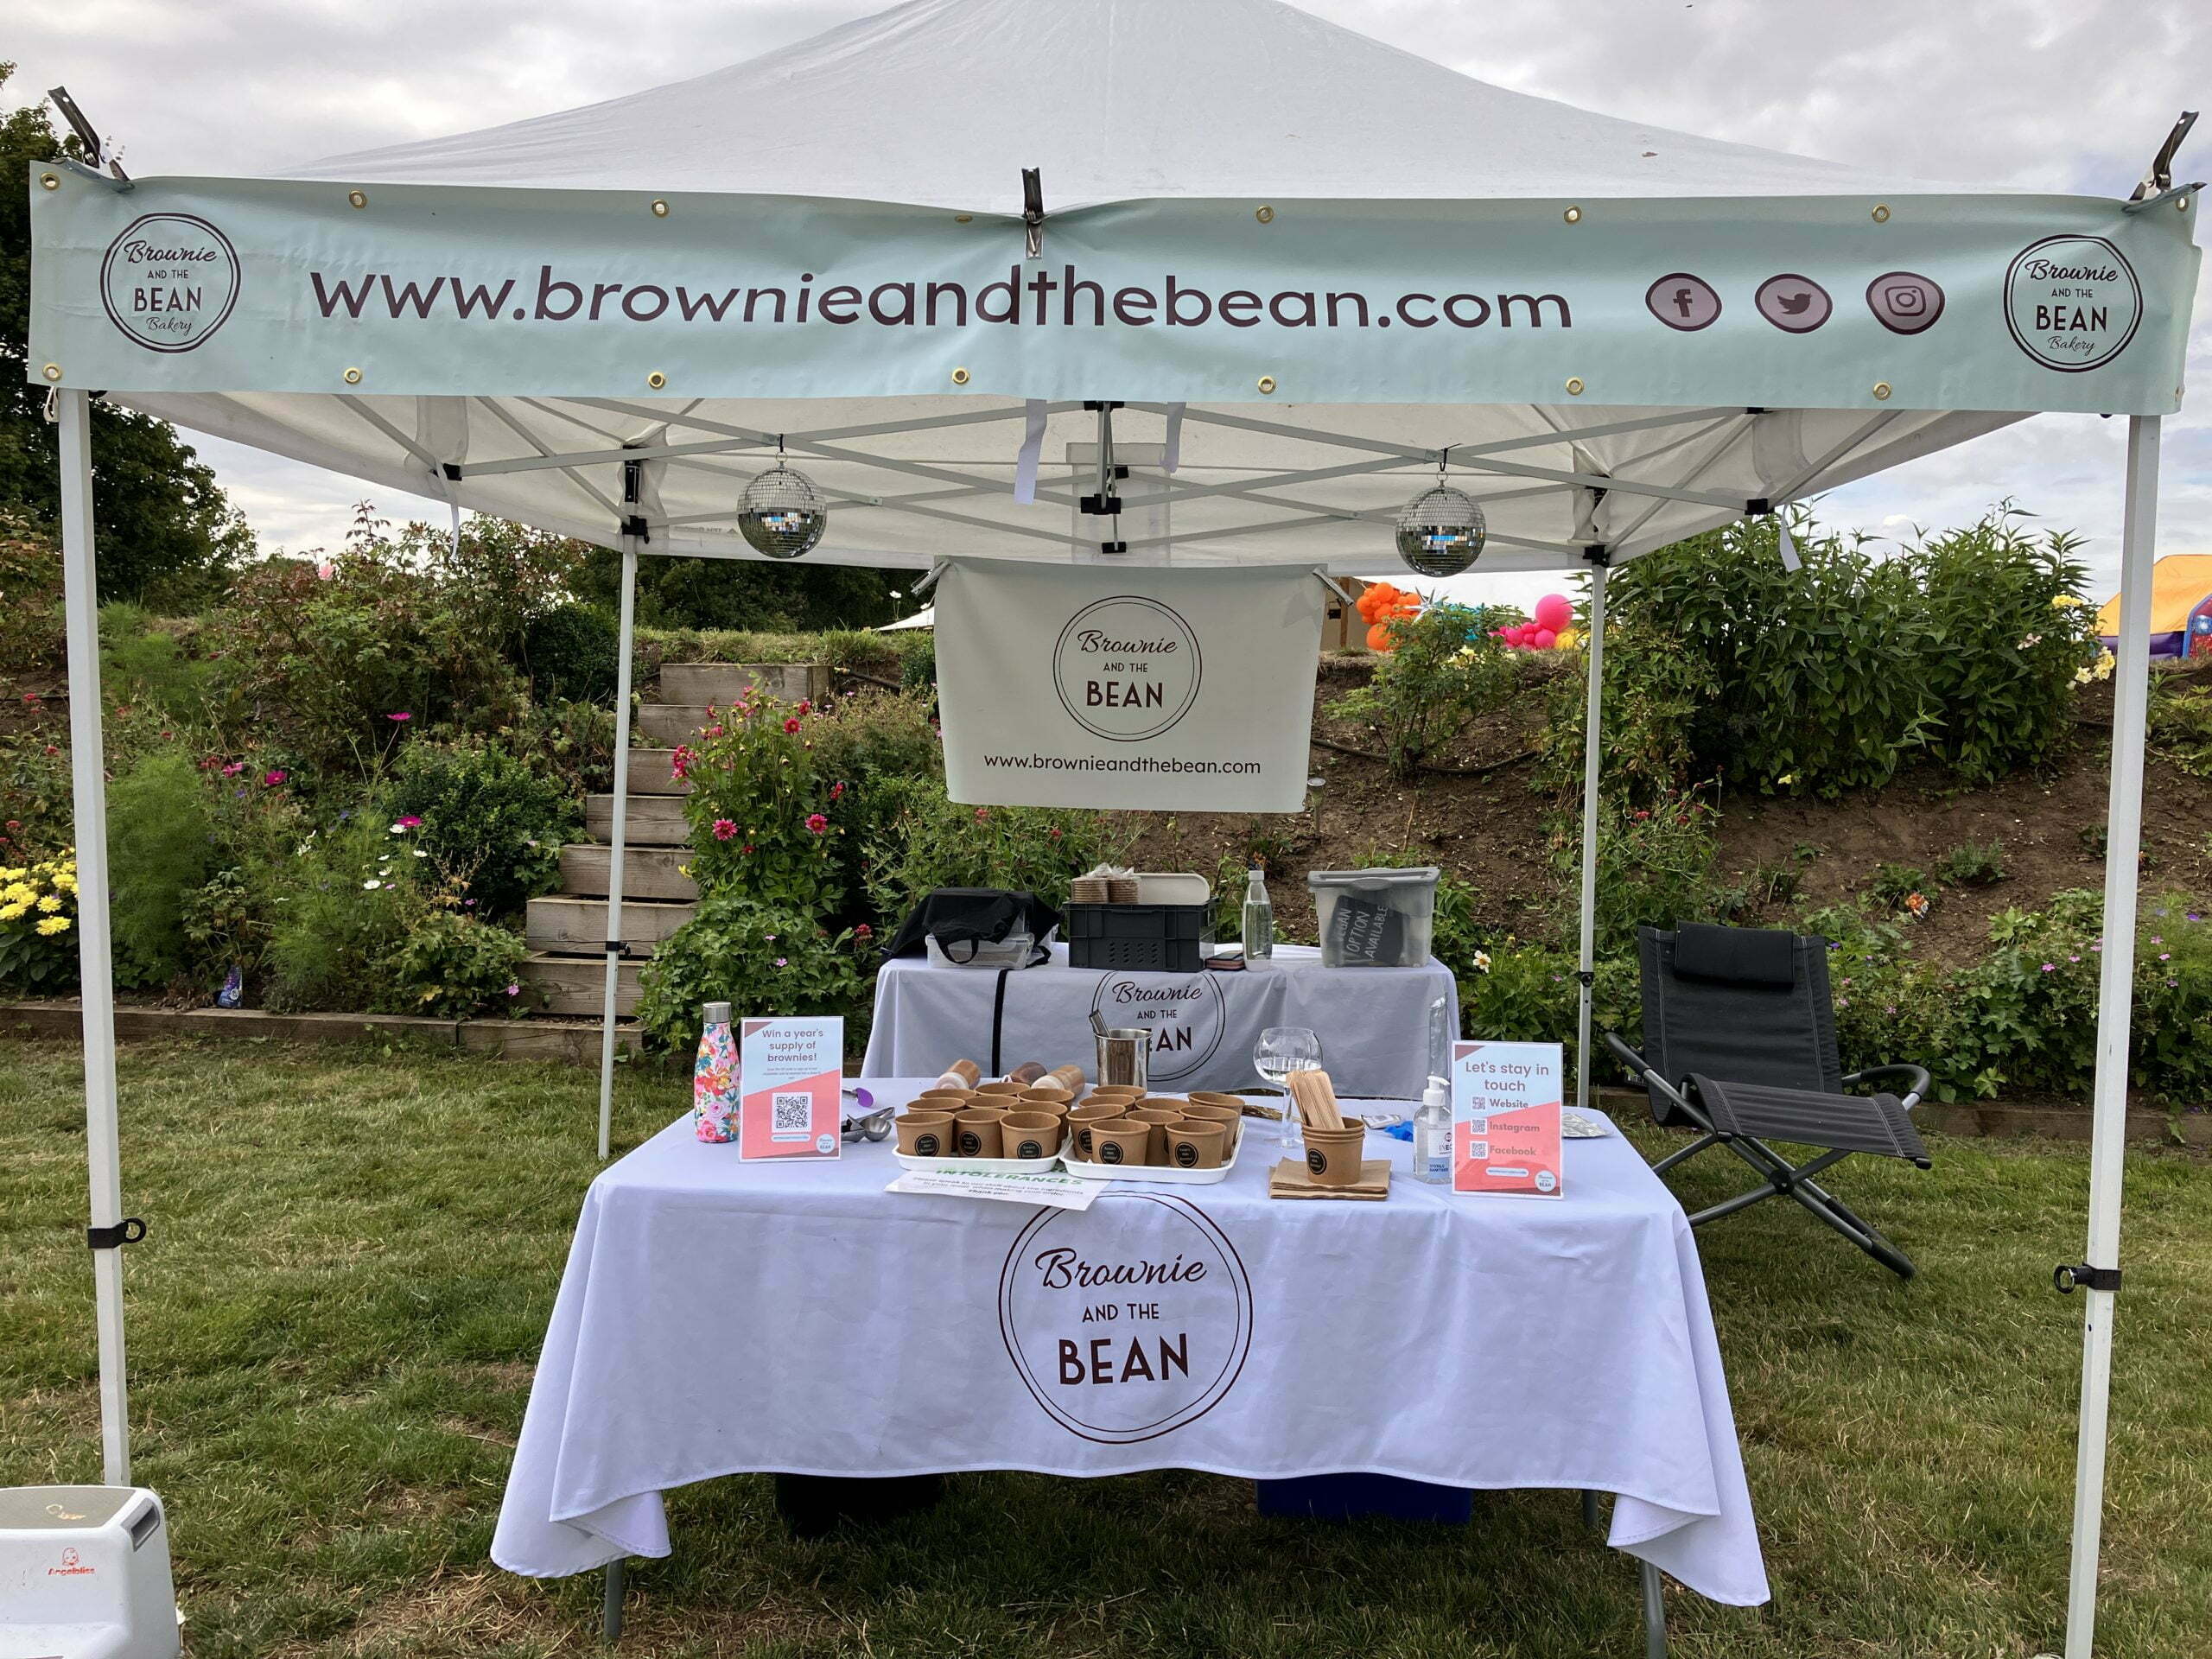 The brownie and the bean pop-up gazebo set up for an event